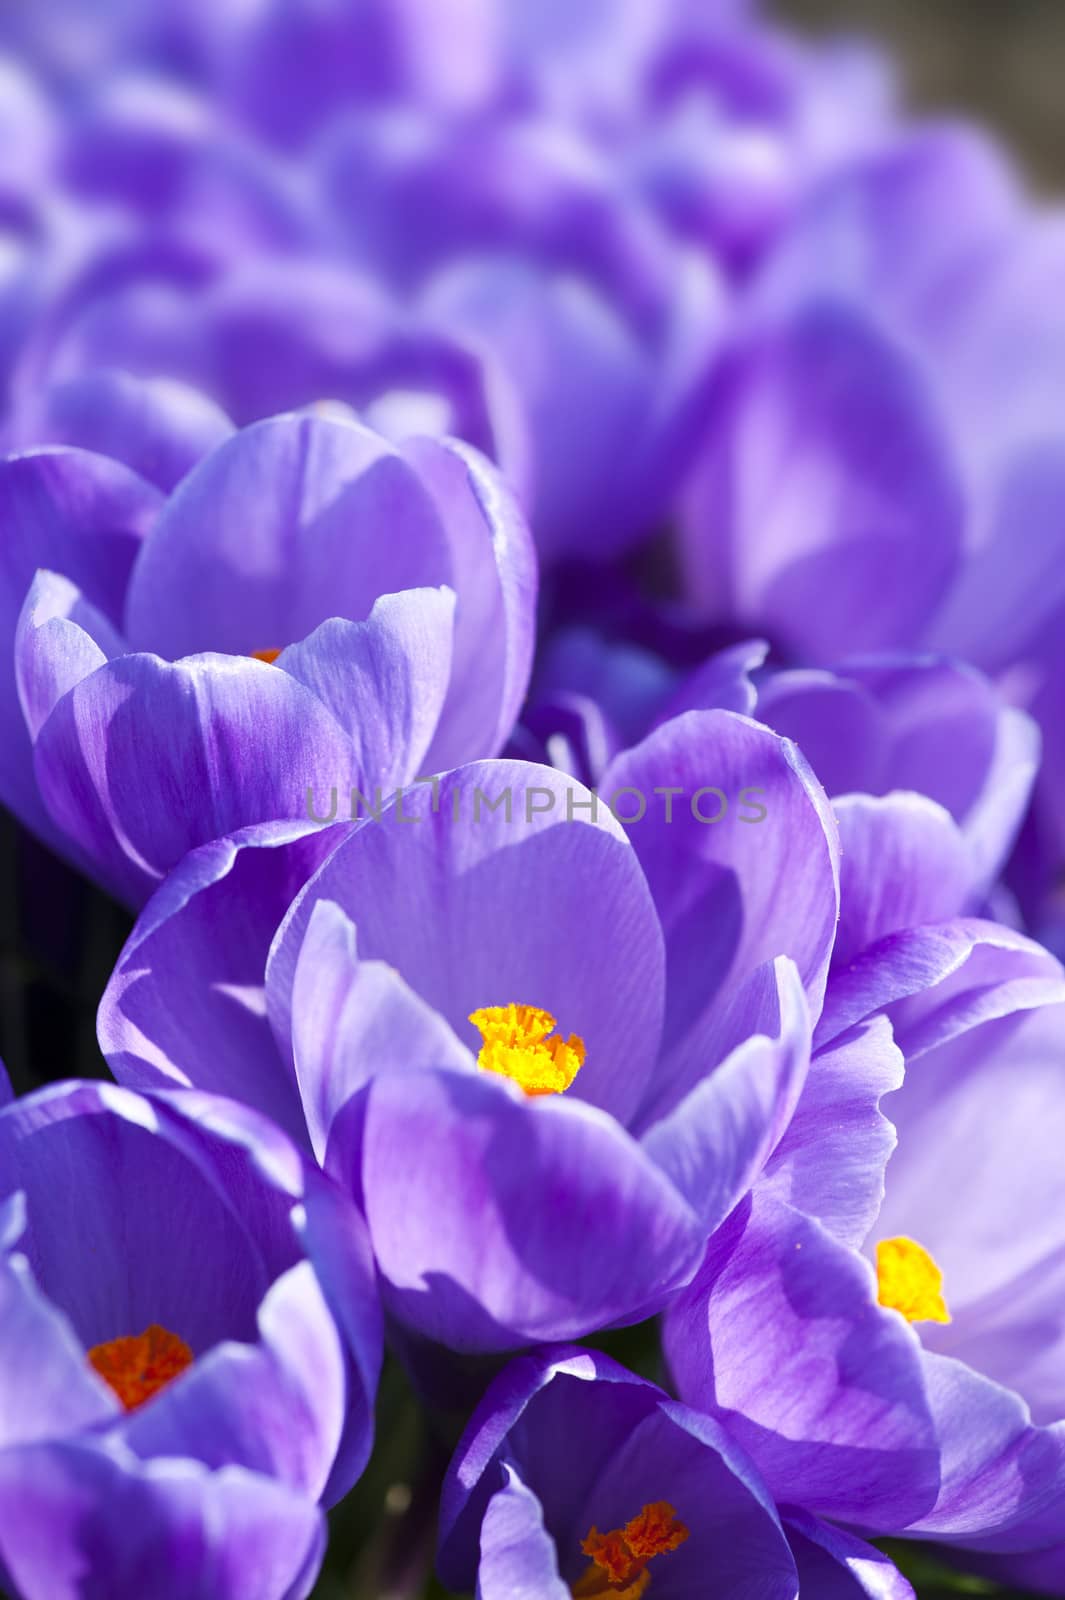 Purple crocus flowers in the spring time